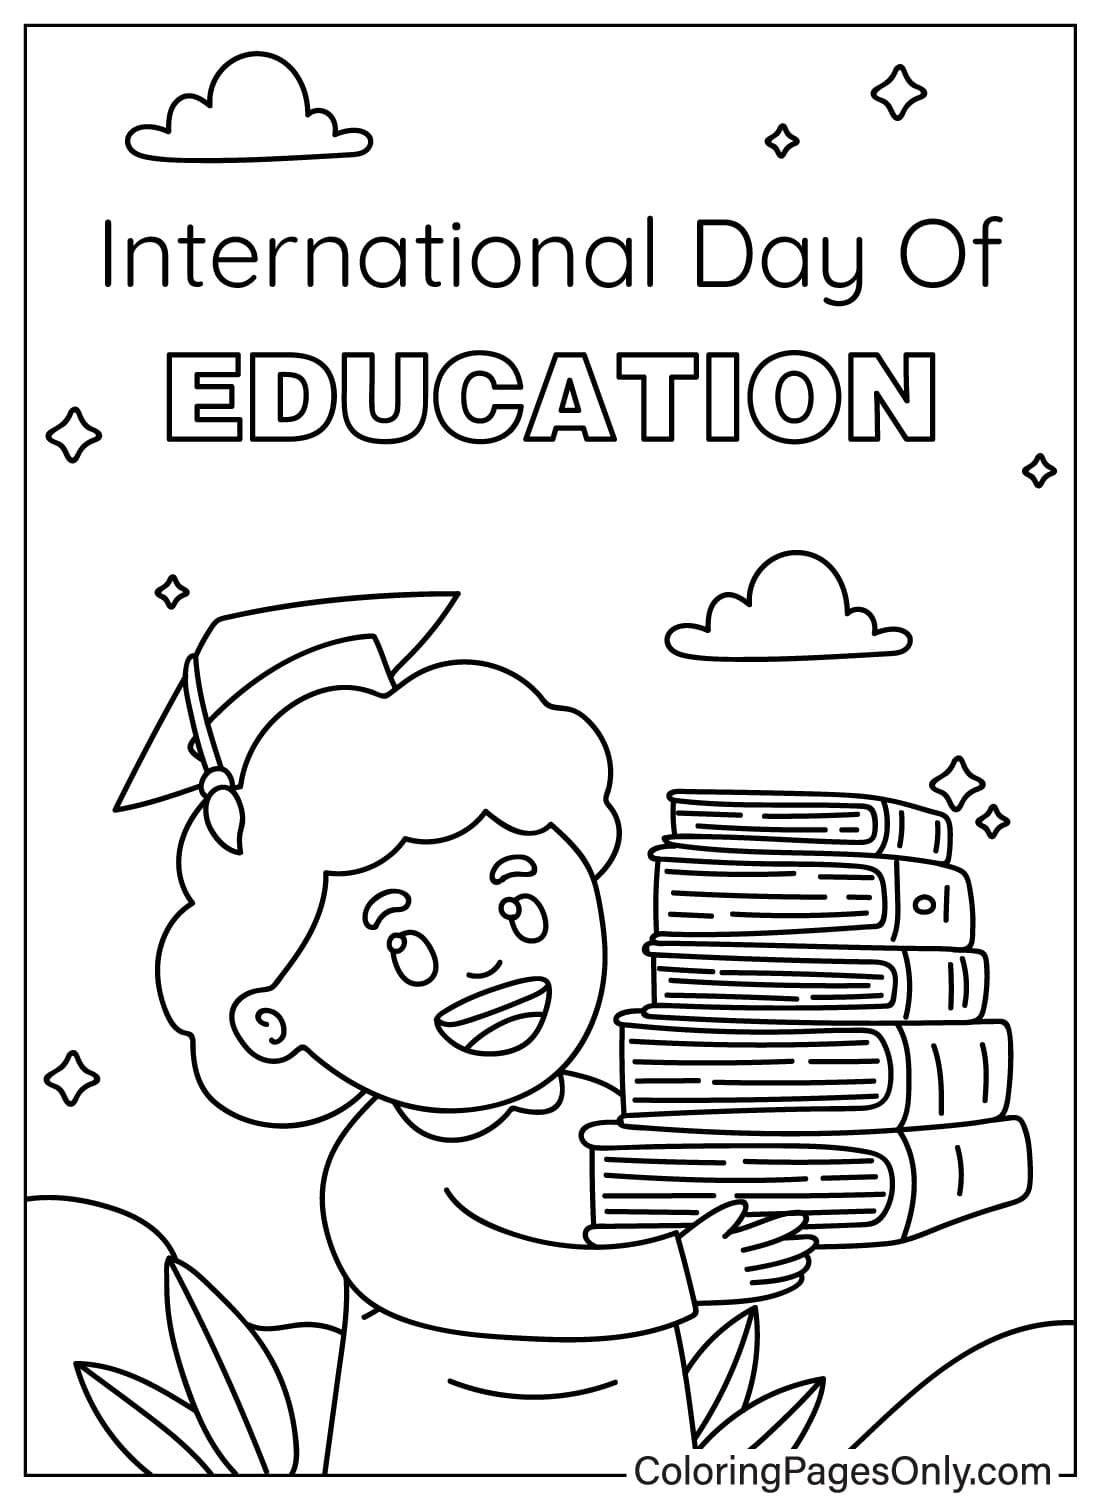 International Day of Education Coloring Page to Print from International Day of Education